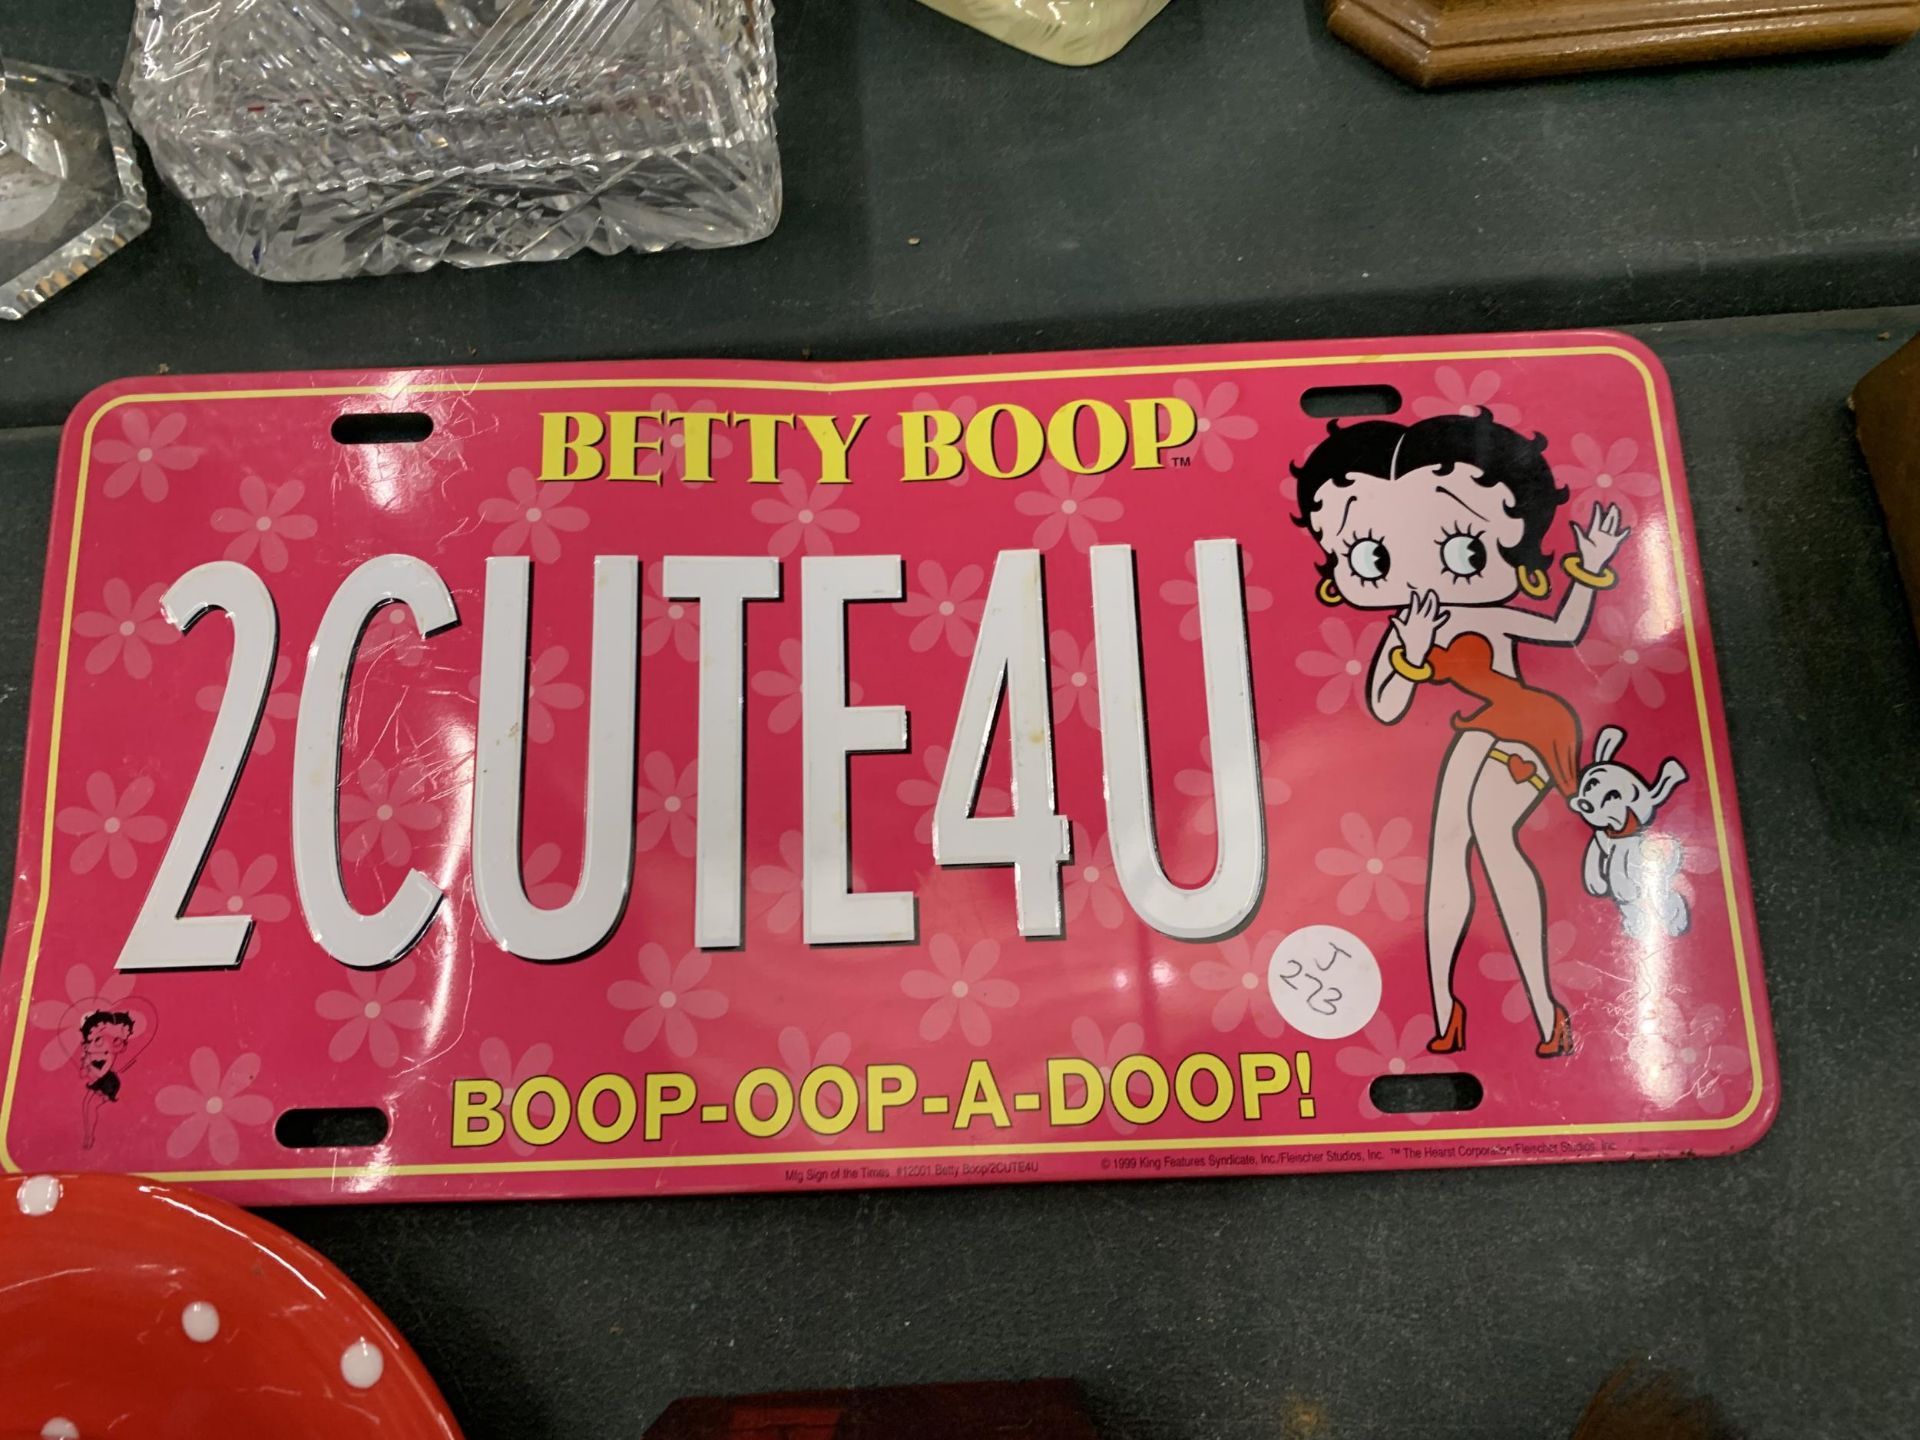 A QUANTITY OF BETTY BOOP ITEMS TO INCLUDE A MUG AND SAUCER, NUMBER PLATE, ASH TRAYS, A WATCH, KEY - Image 7 of 12